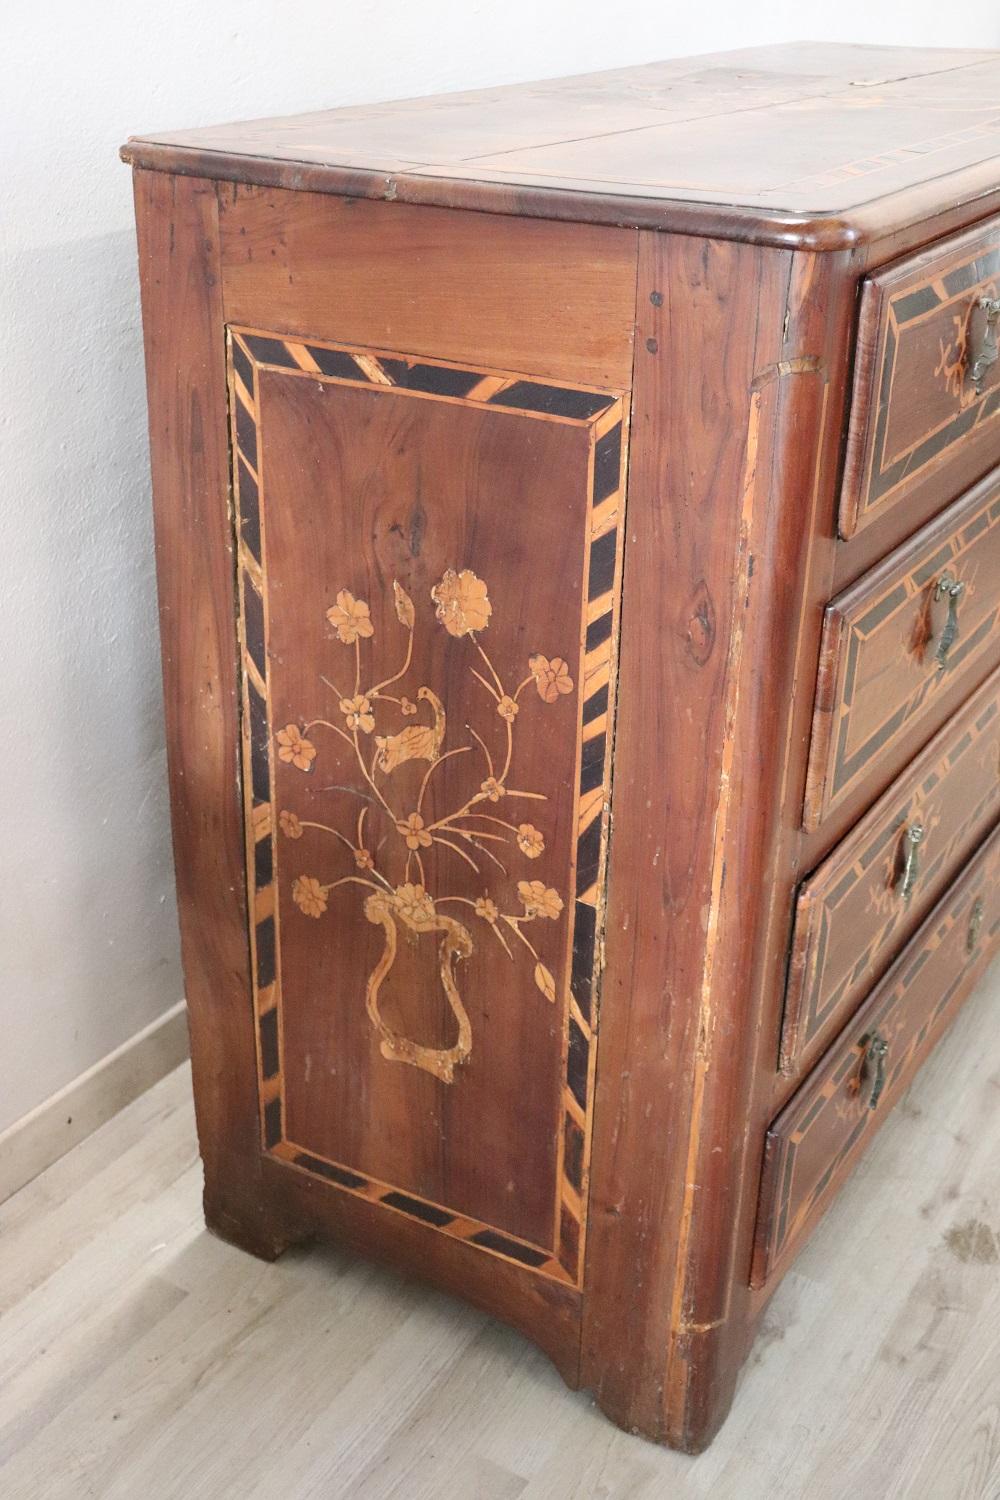 17th Century Italian Louis XIV Walnut Inlaid Antique Commode or Chest of Drawers In Good Condition For Sale In Casale Monferrato, IT